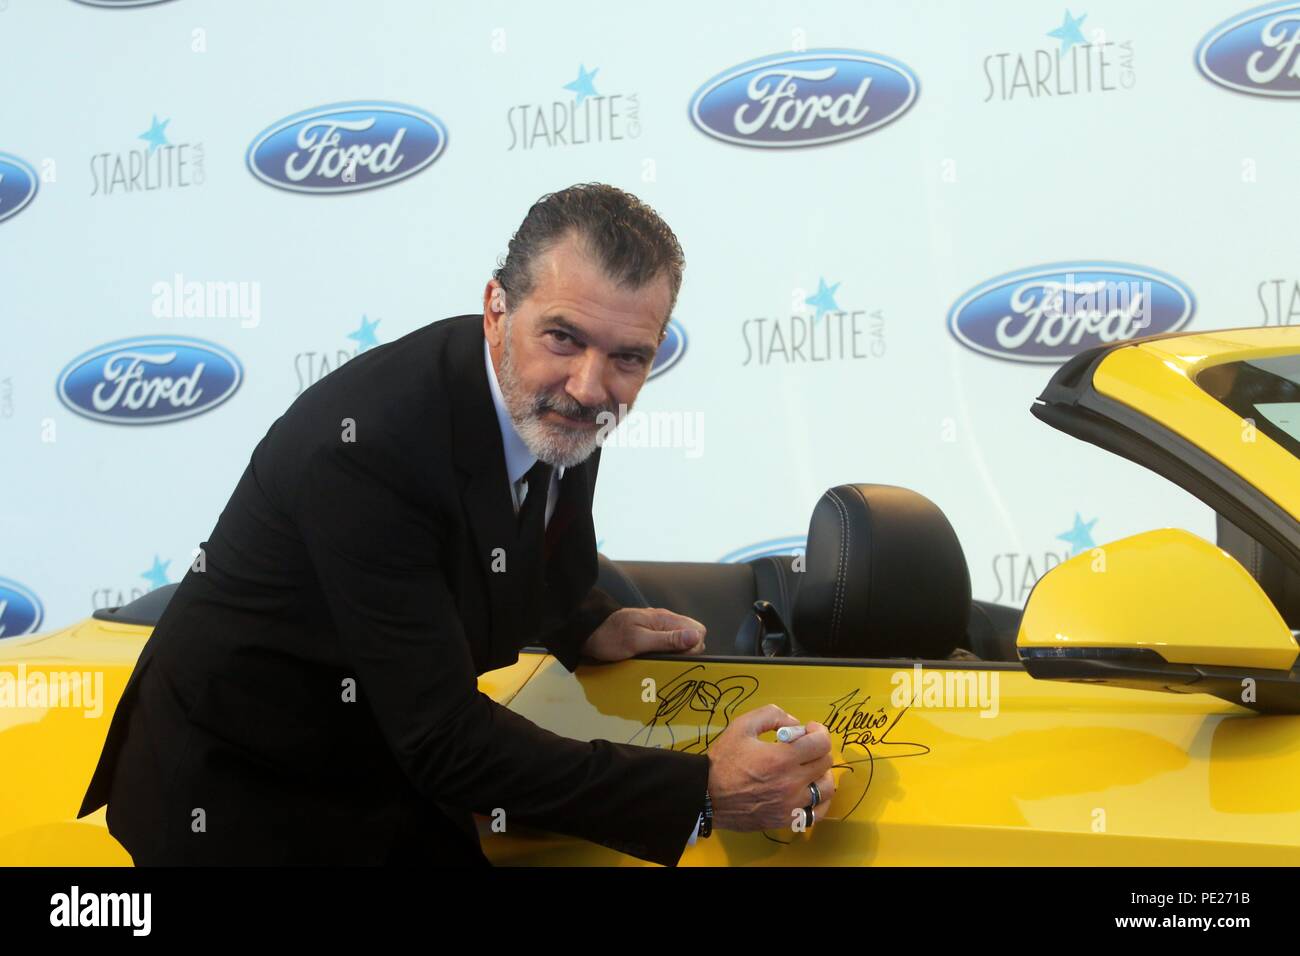 Marbella, Spain 11th August 2018. Donation of a Ford Mustang at the Starlite charity gala, signed by Colombian singer Juanes and Spanish actor Antonio Banderas in Marbella, Spain on August 11, 2018  Carnero / 692 / Cordon Press Credit: CORDON PRESS/Alamy Live News Stock Photo